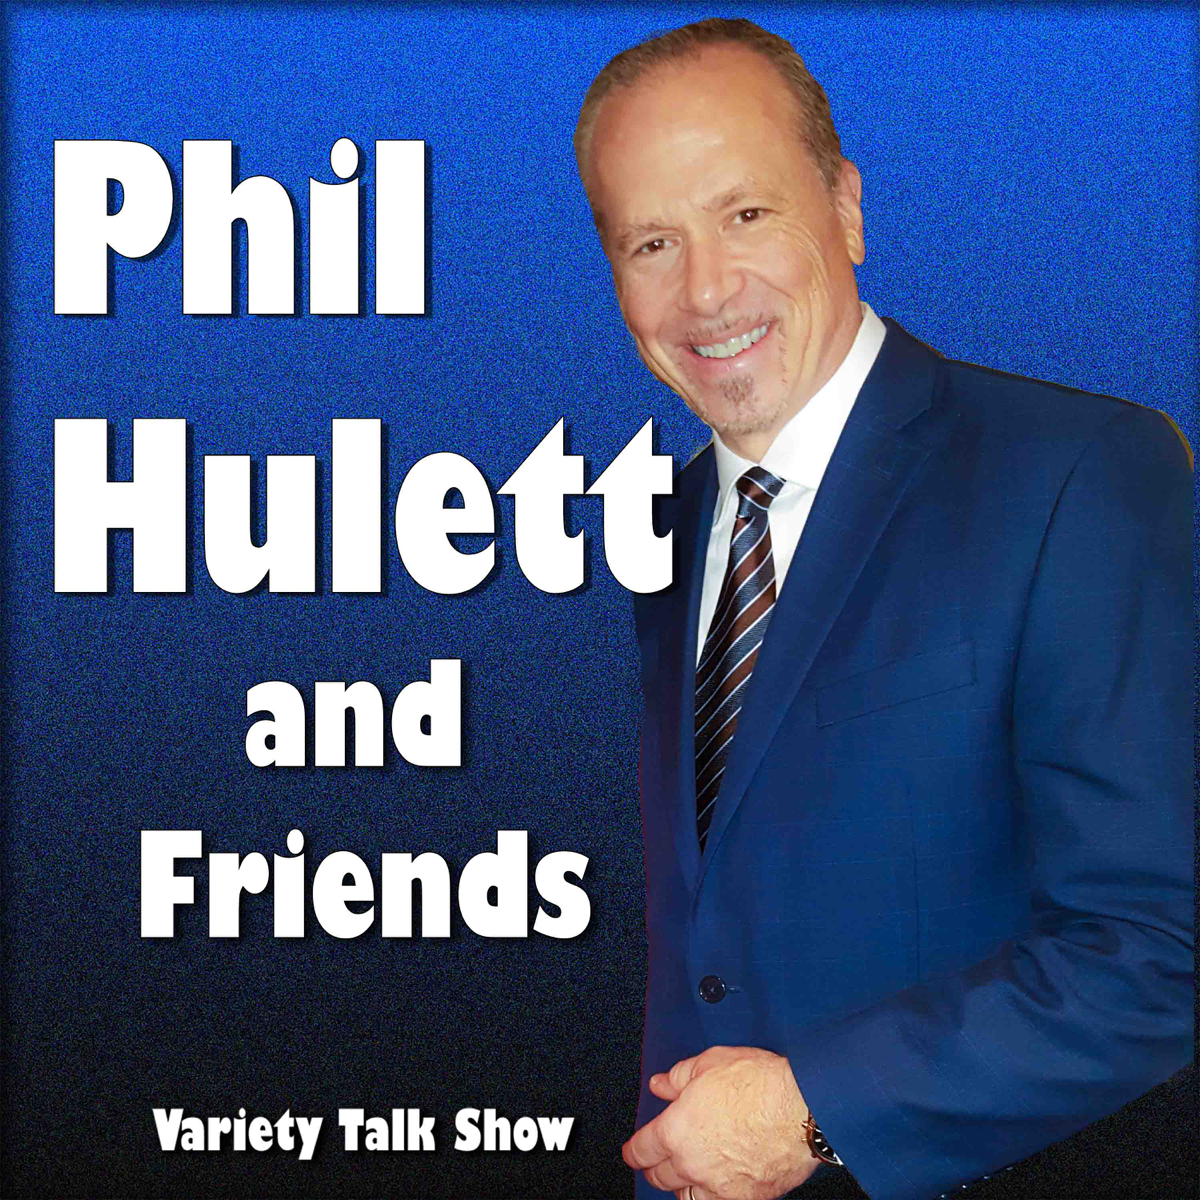 India Summer Nude Beach - Best episodes of Phil Hulett and Friends | Podyssey Podcasts